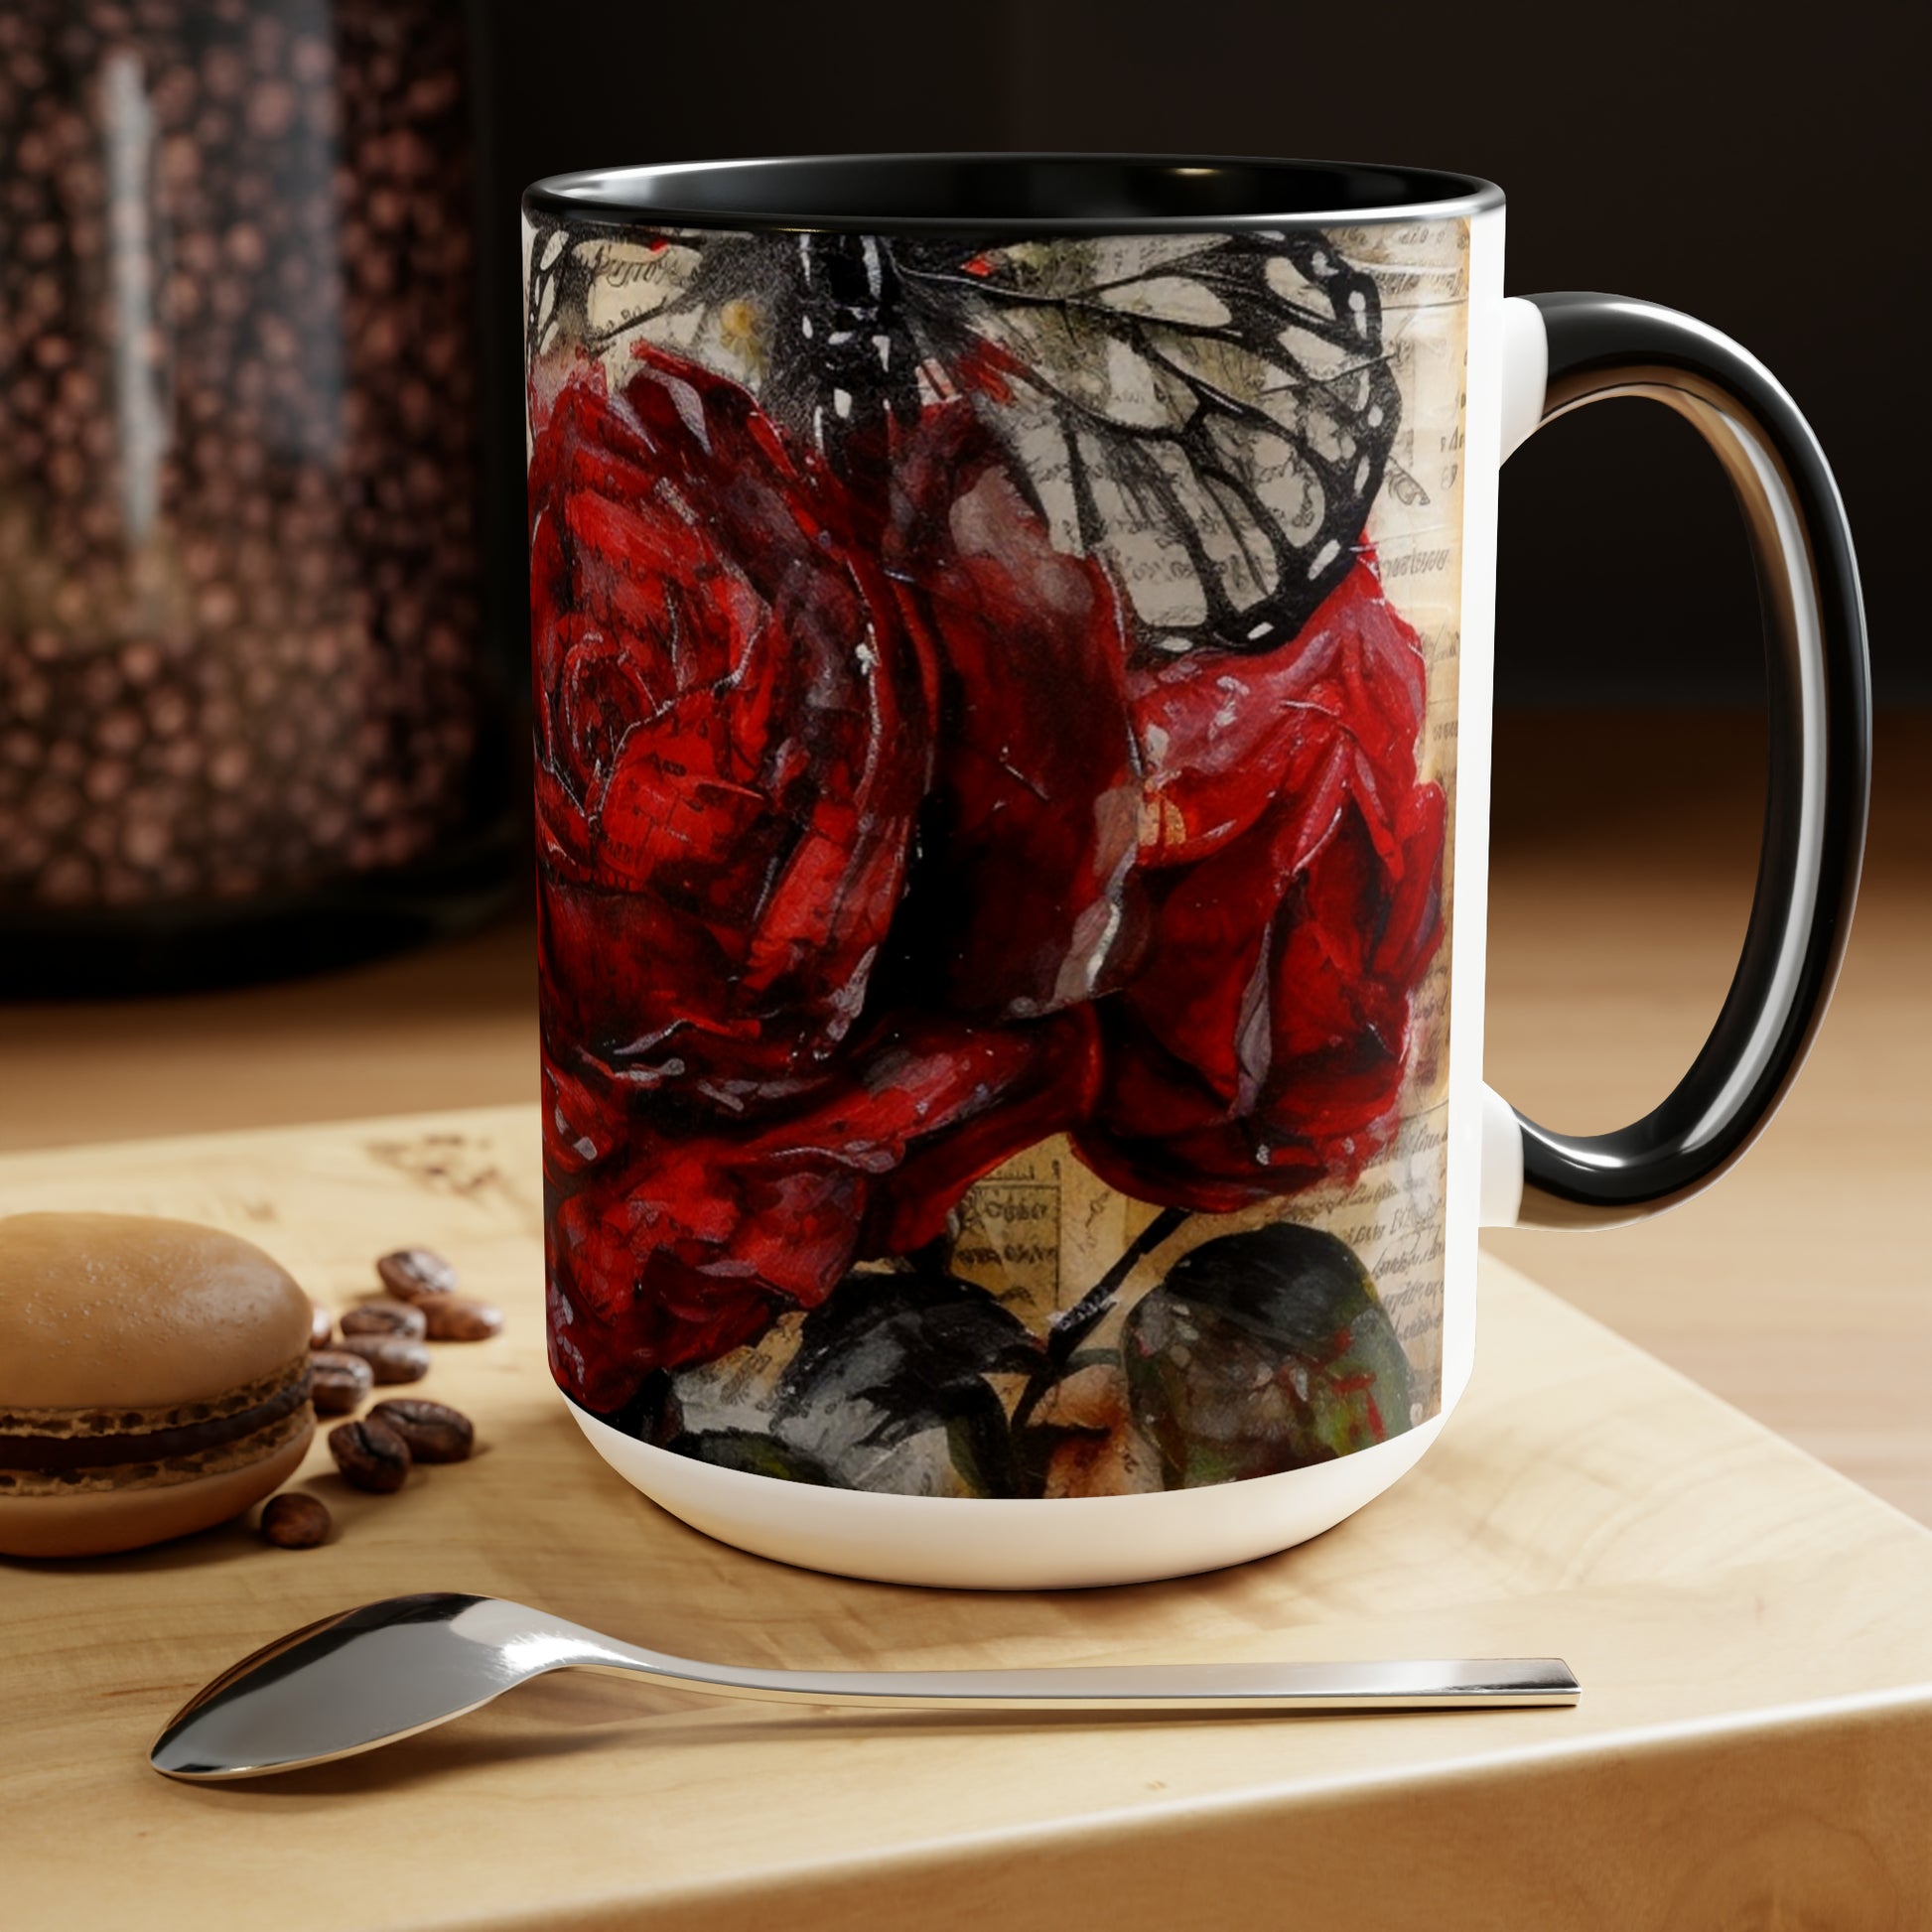 Two-Tone Coffee Mugs, 15oz, Red Rose with Butterfly - black rim